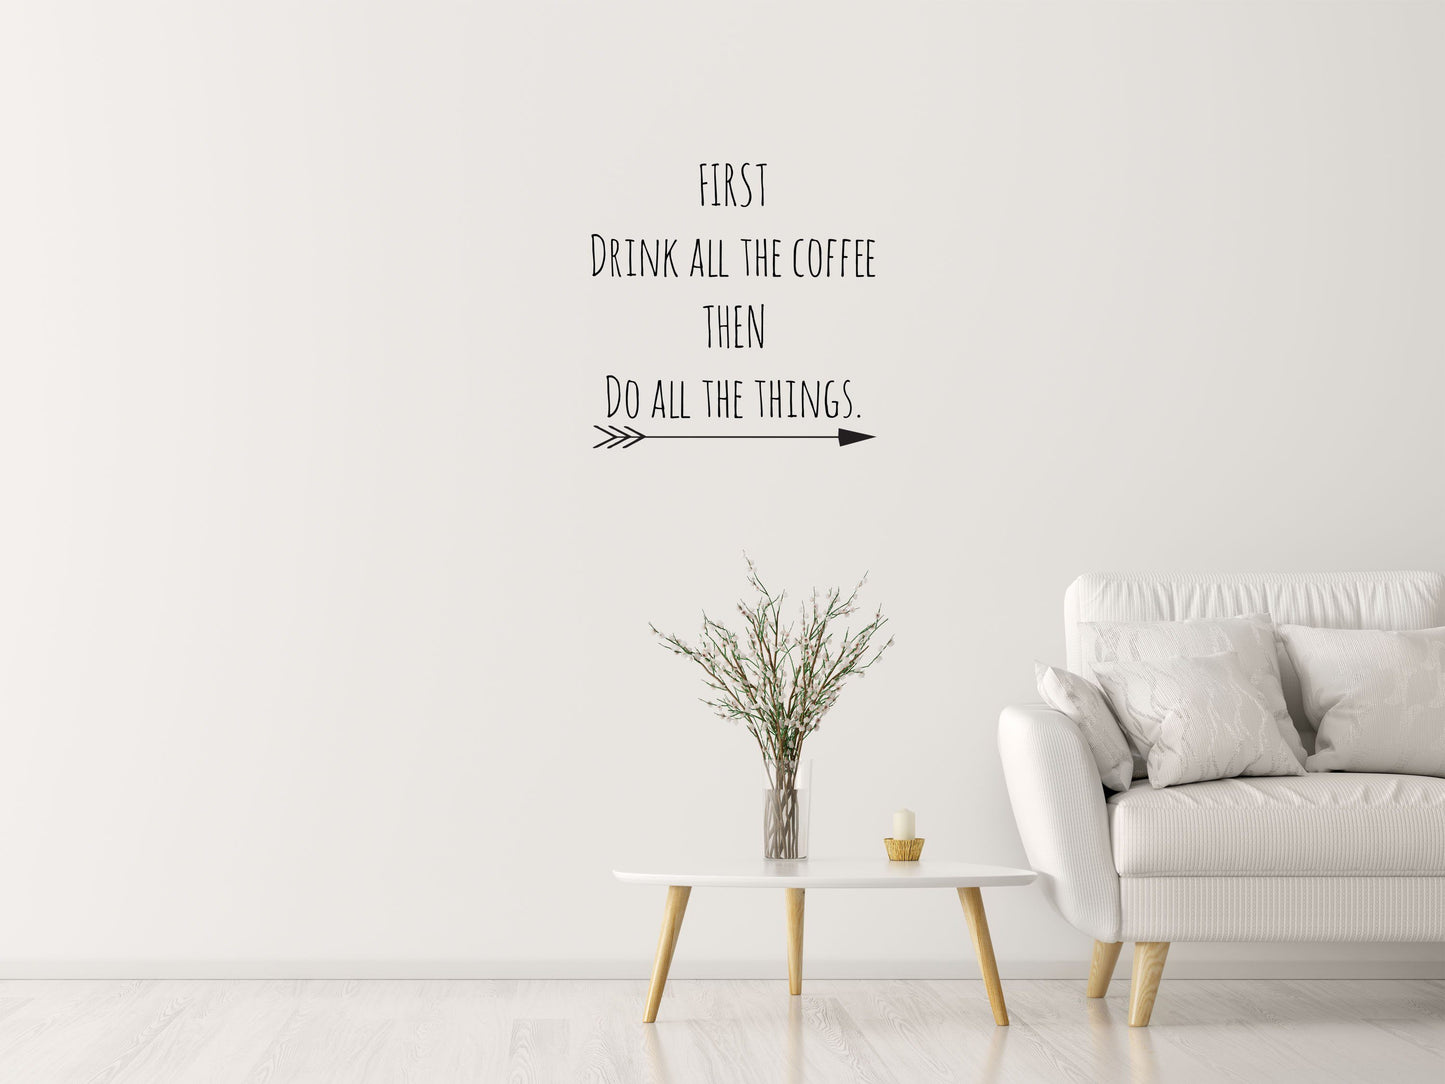 First Drink All The Coffee Then Do All The Things - Inspirational Wall Decals Vinyl Wall Decal Inspirational Wall Signs 